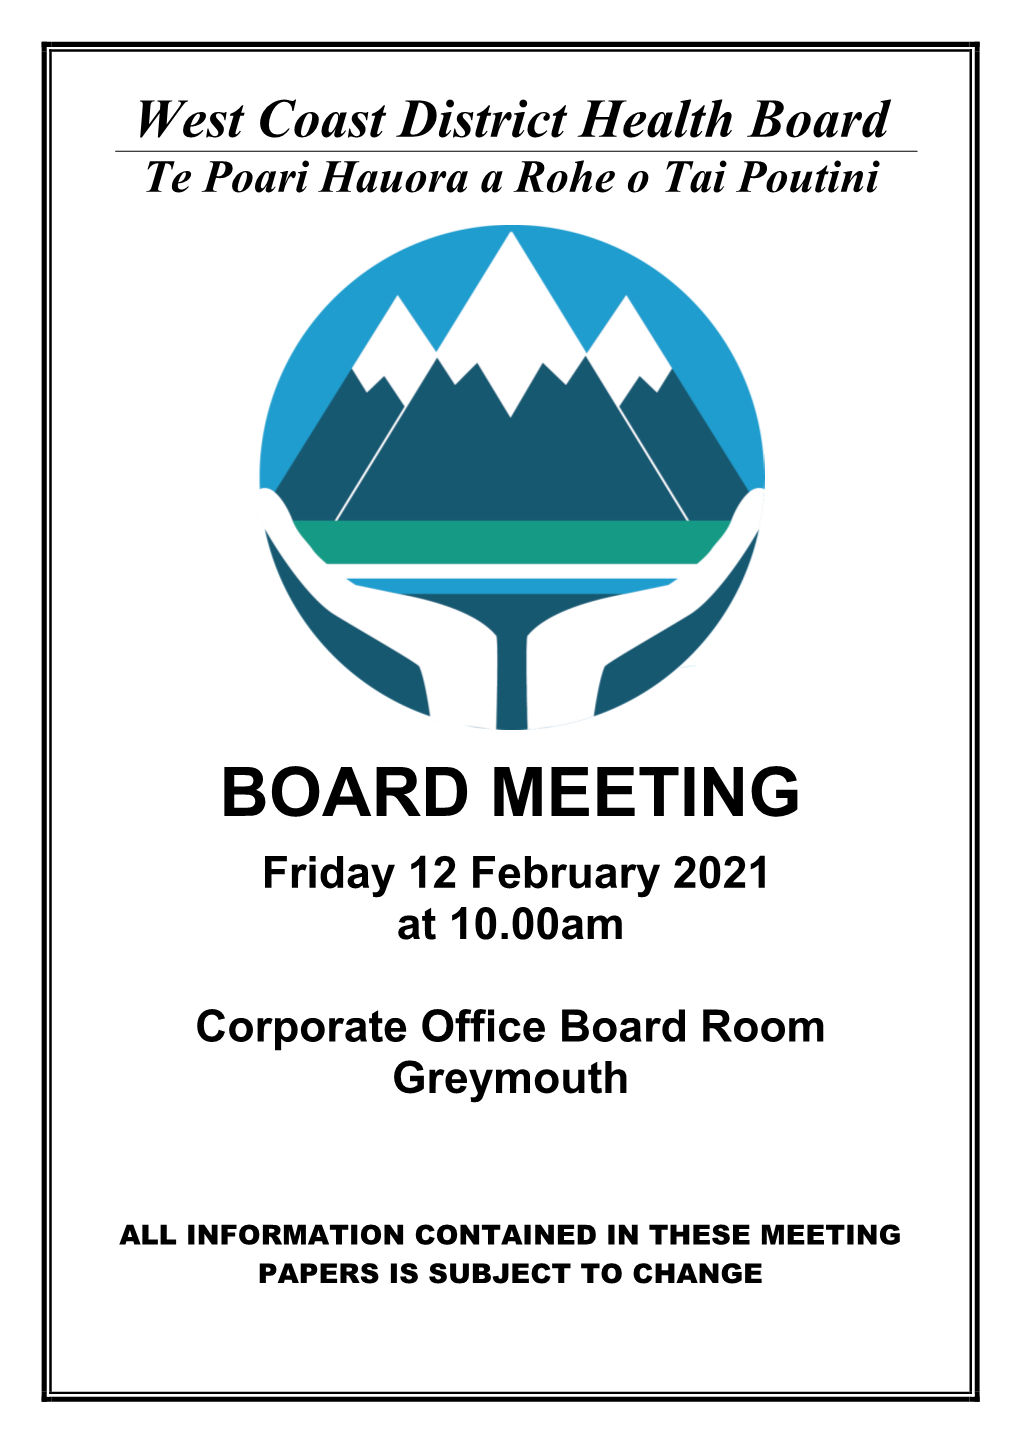 Board Papers for the West Coast DHB Board Meeting Friday, 12 February